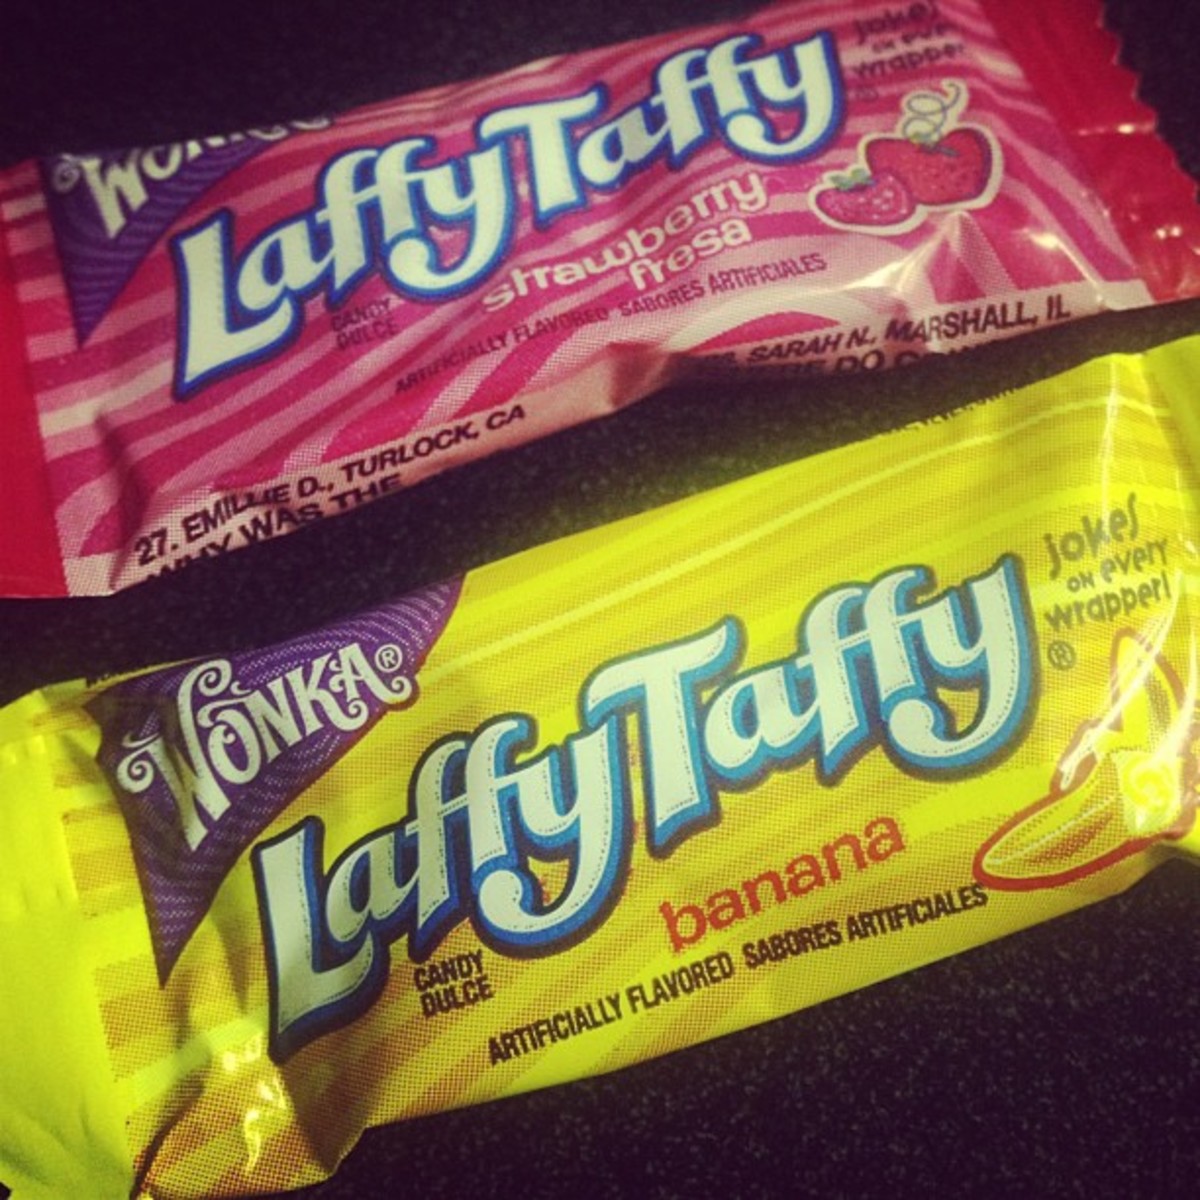 Laffy Taffy is a type of taffy candy that has a bunch of flavor.